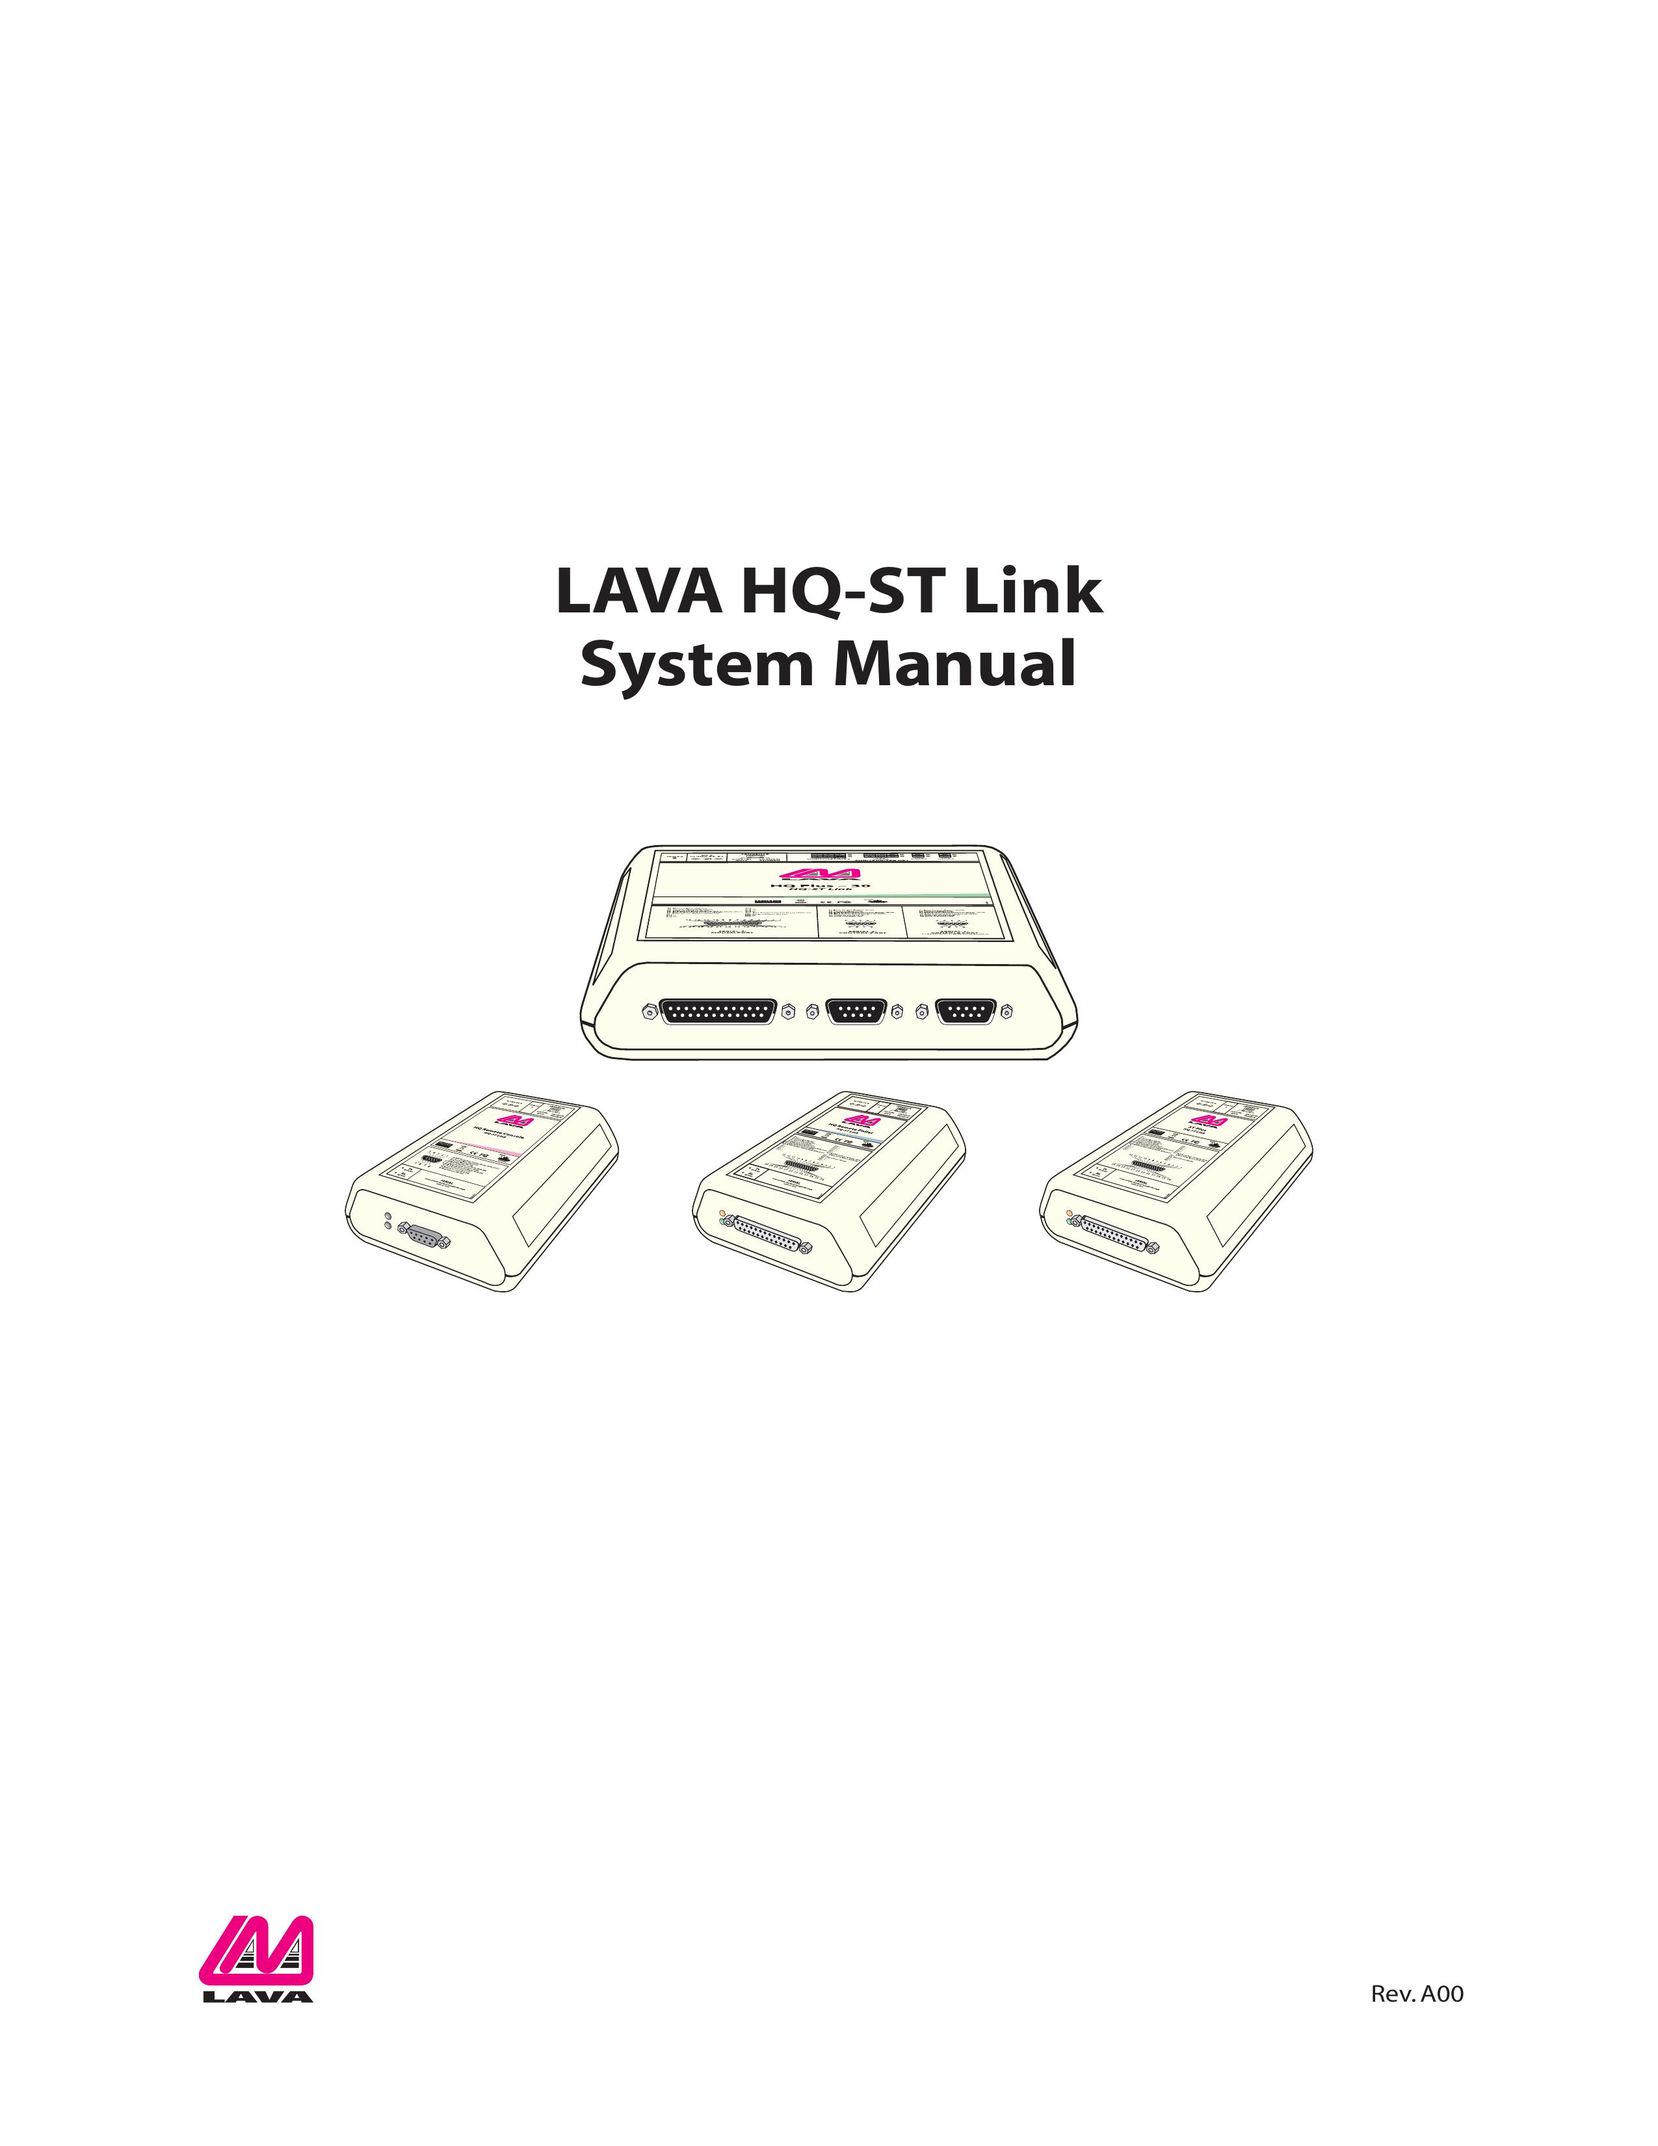 Lava Computer HQ-ST Link Network Card User Manual